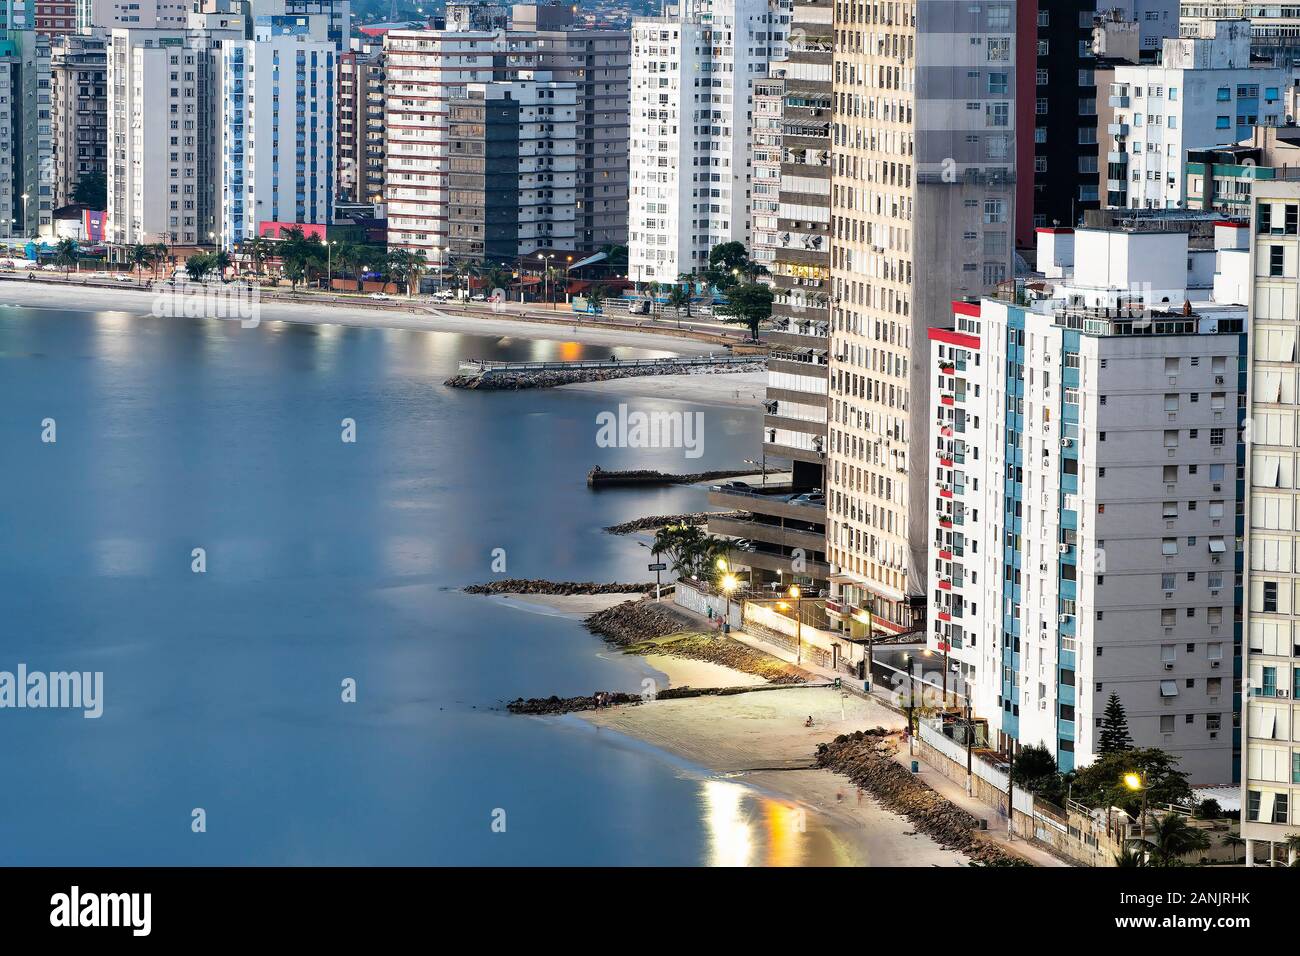 Sao Vicente - SP, Brazil - November 21, 2019: View of the buildings and beaches of Sao Vicente city, SP Brazil at dusk, when the lights of the city st Stock Photo